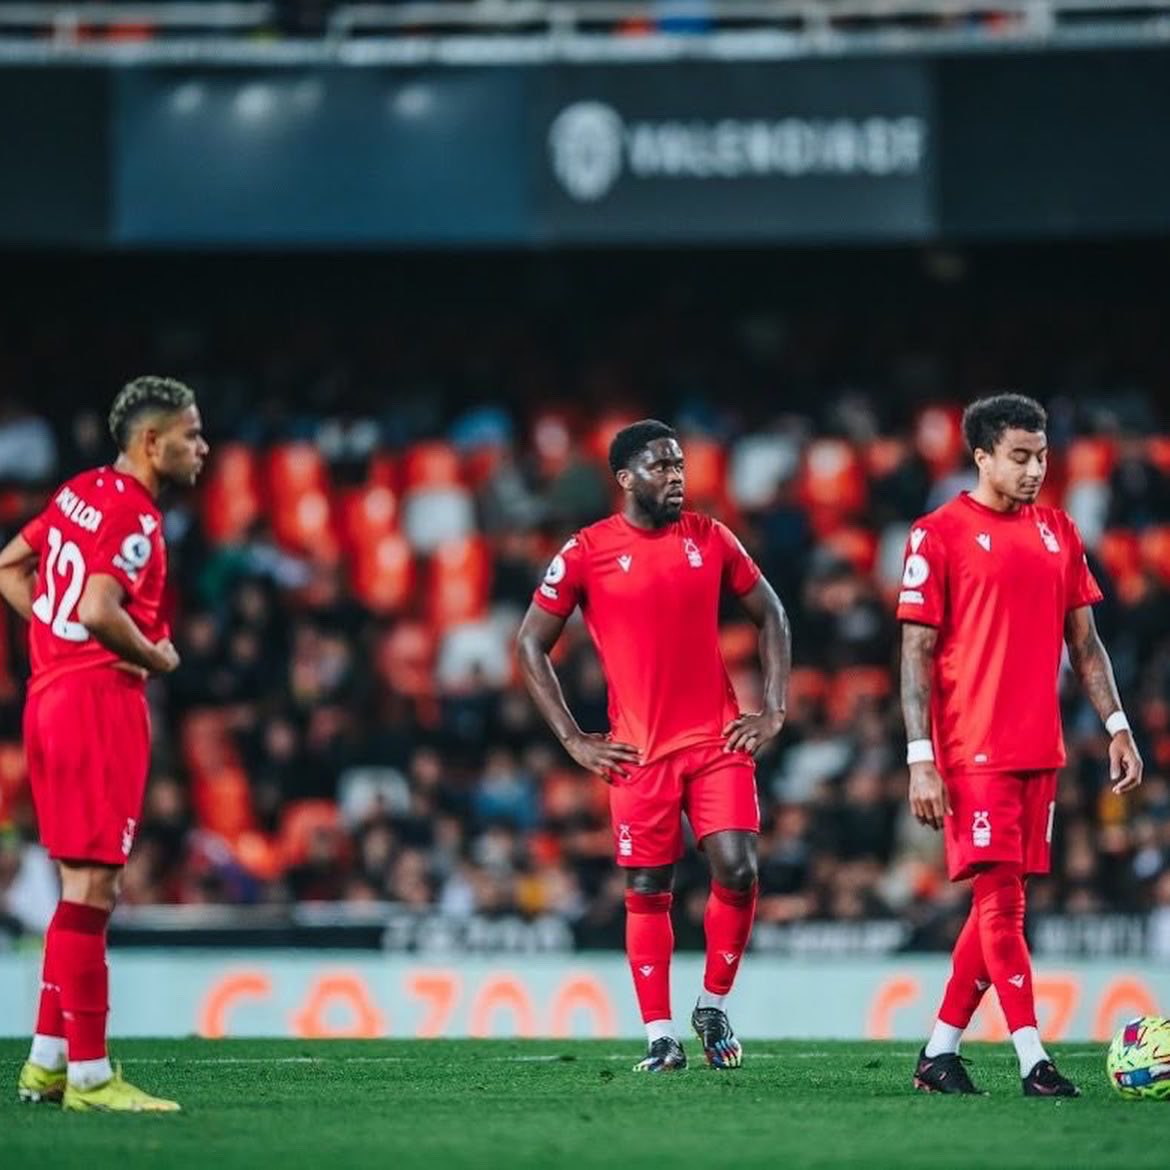 Friday nigth In Valencia ✨
All glory to god ☝🏾

#NFFC #Mangality